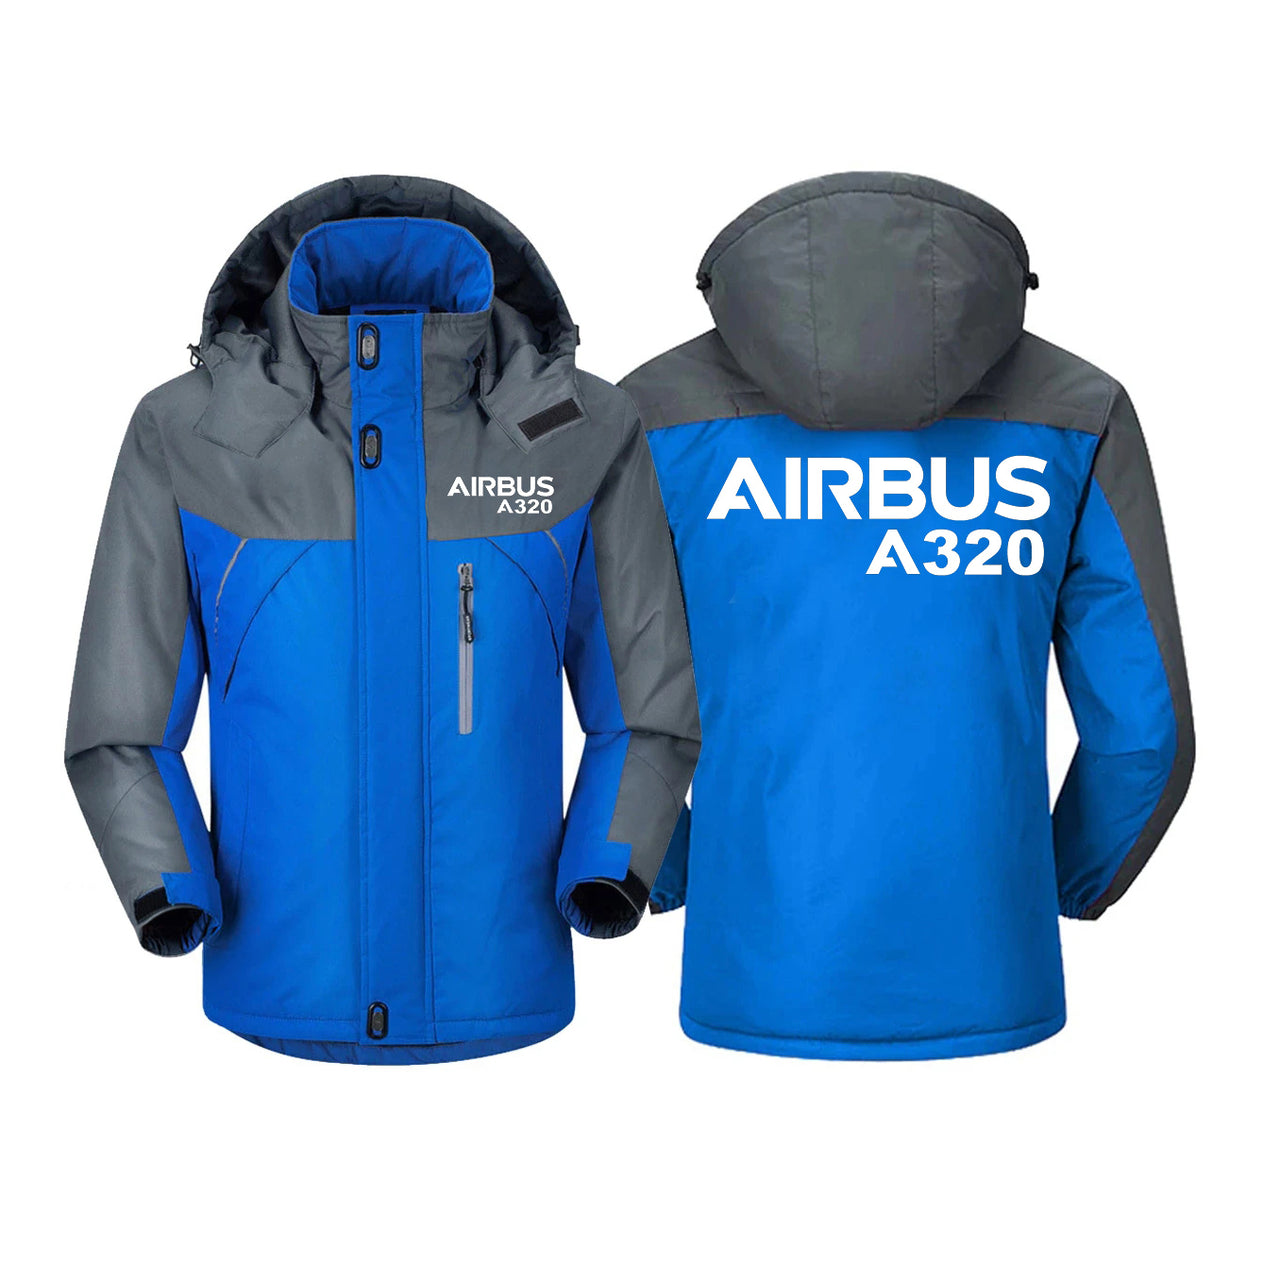 Airbus A320 & Text Designed Thick Winter Jackets